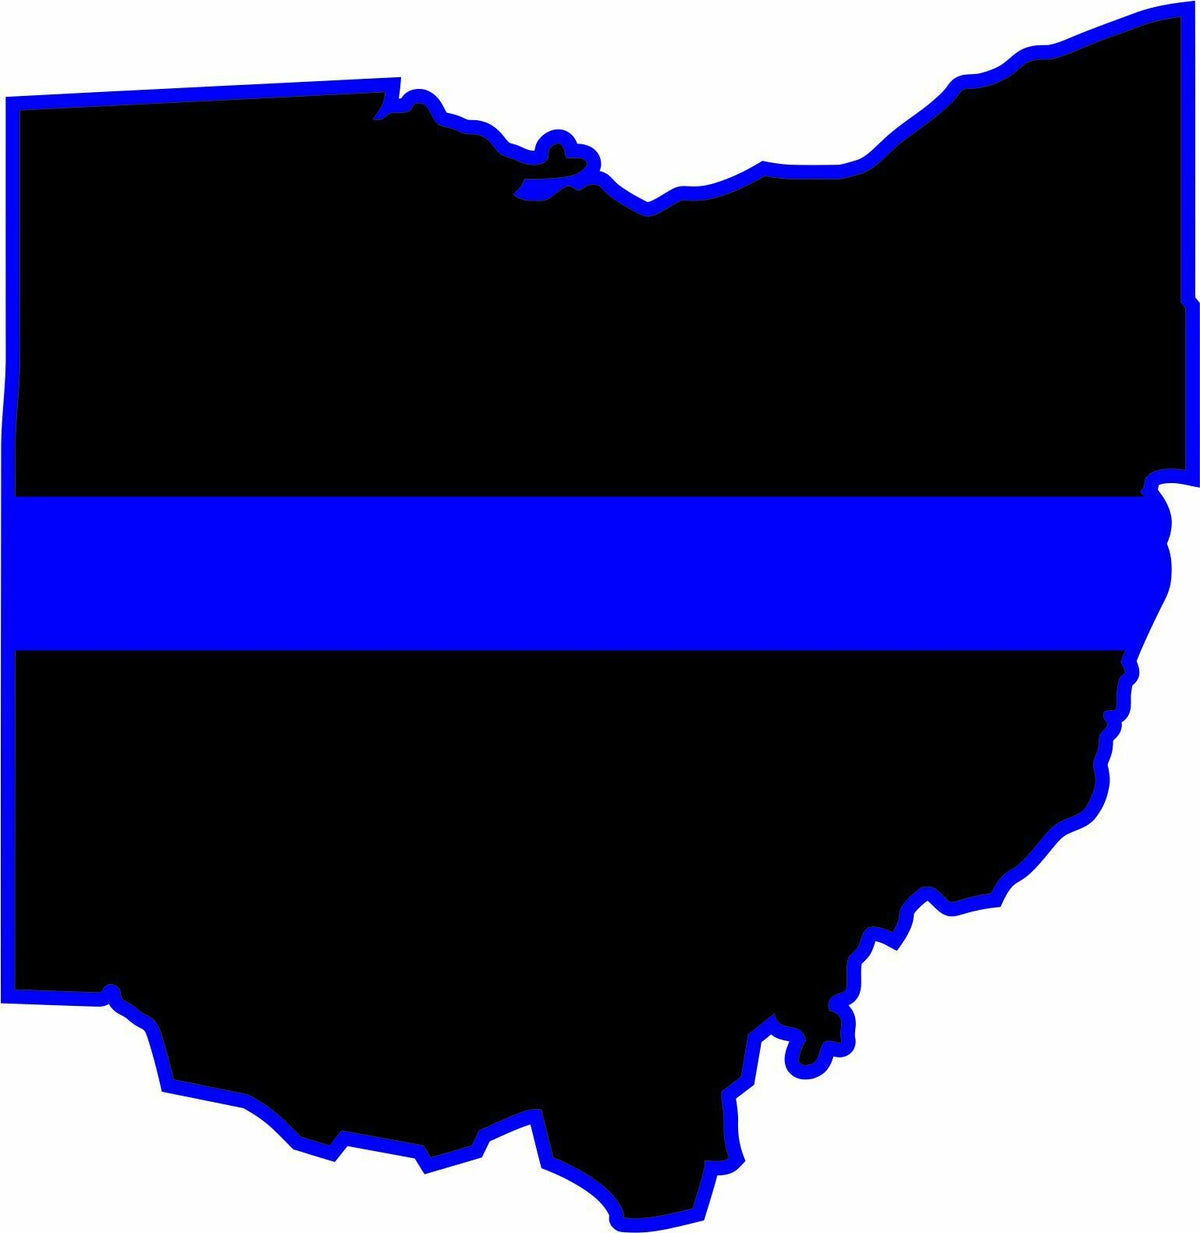 Thin Blue line decal - State of Ohio Reflective Blue Line/Outline Decal - Powercall Sirens LLC